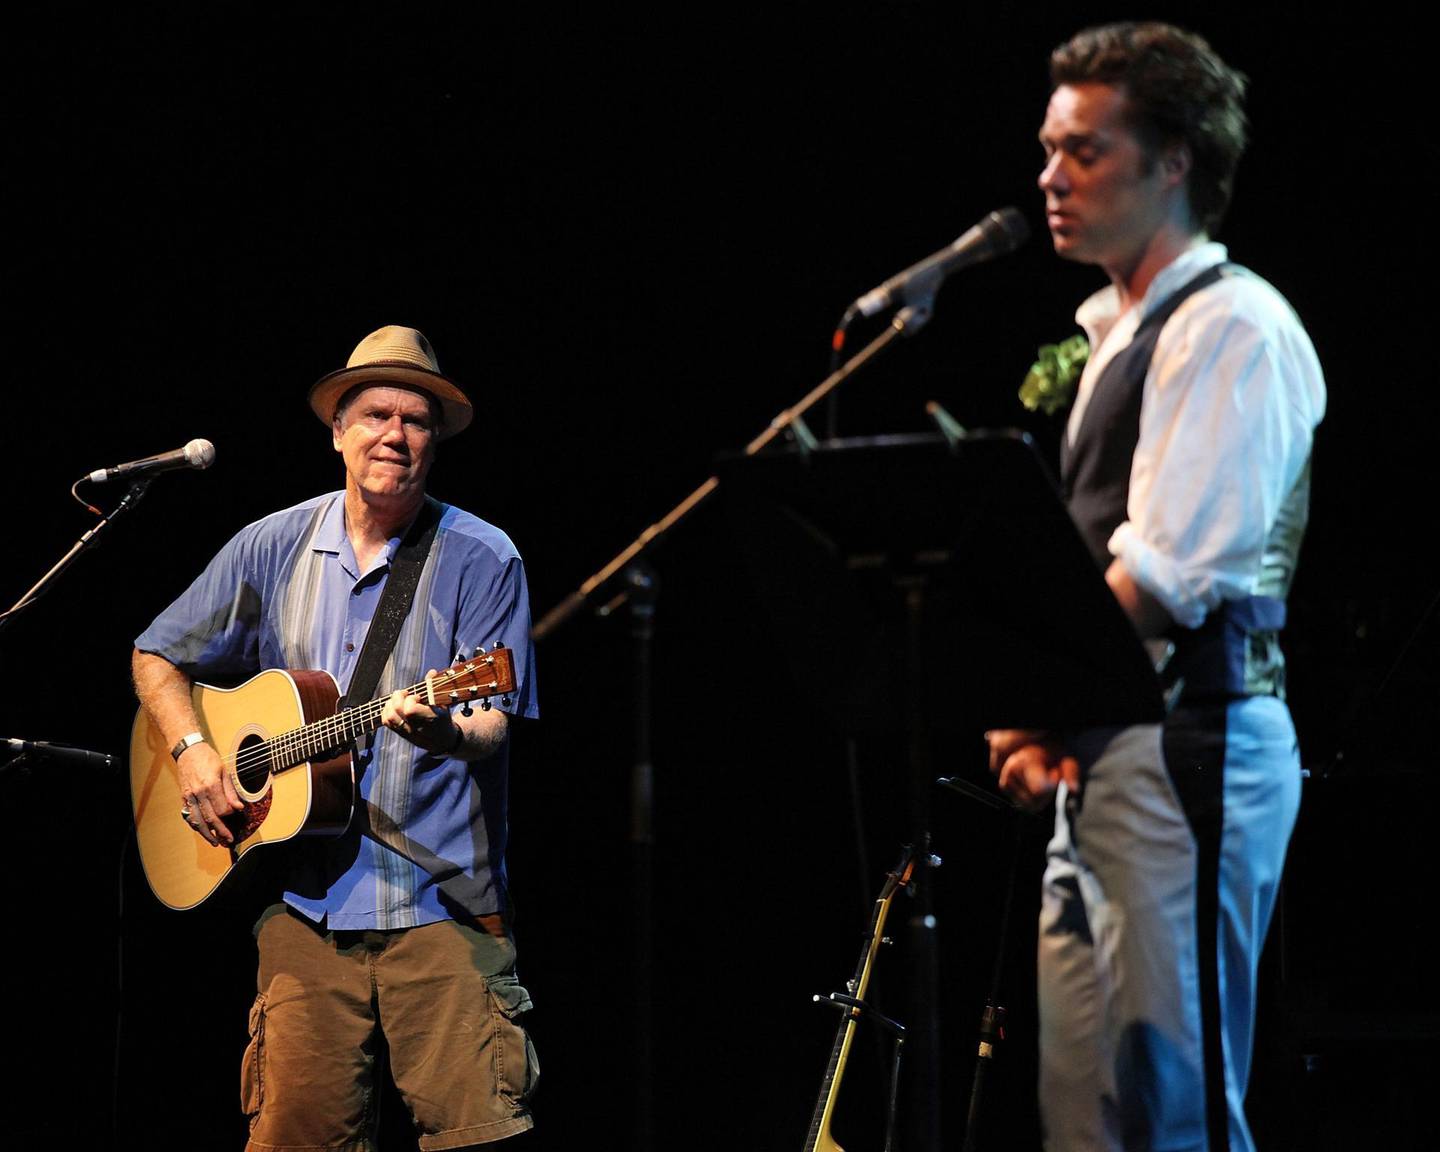 NEW YORK - JULY 20:  Singer Loudon Wainwright III and son Rufus Wainwright perform during the 32nd Celebrate Brooklyn Summer Season at the Prospect Park Bandshell on July 20, 2010 in New York City.  (Photo by Ben Hider/Getty Images)